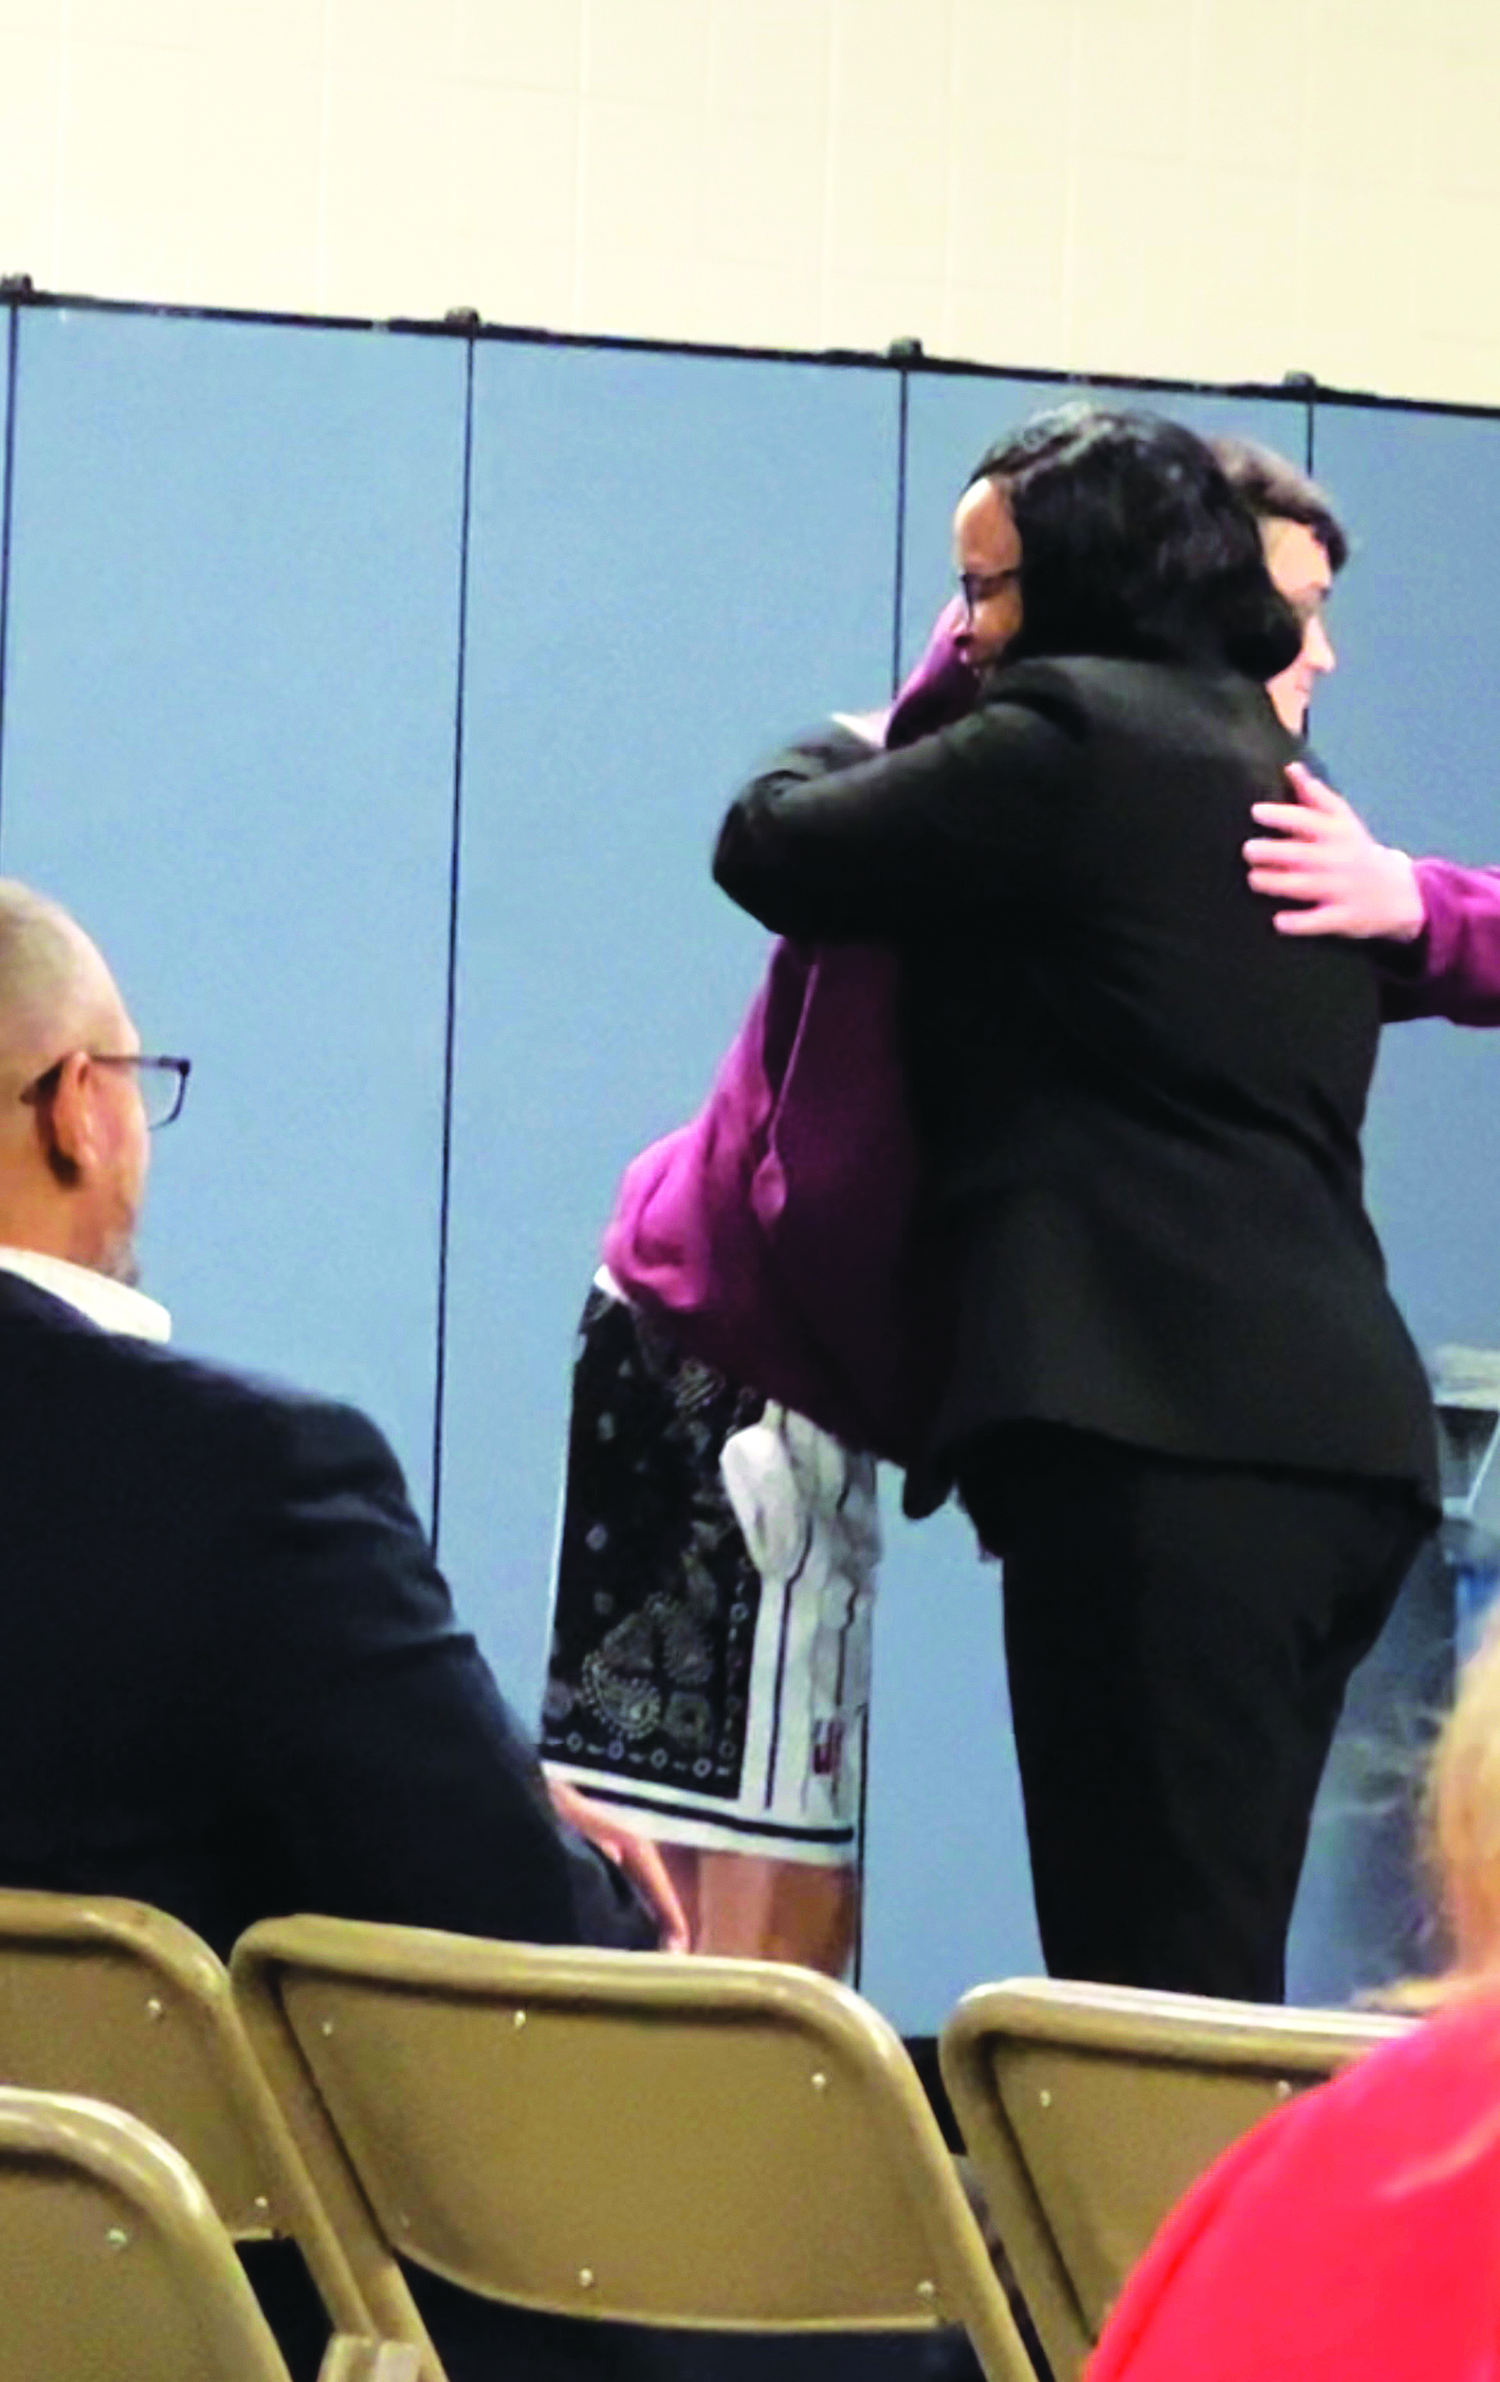 Southampton High School sophomore Noah Kent embraces newly appointed Superintendent of Schools Dr. Fatima Morrell after a heated Board of Education meeting on Tuesday night. SARA MANNINO KENT